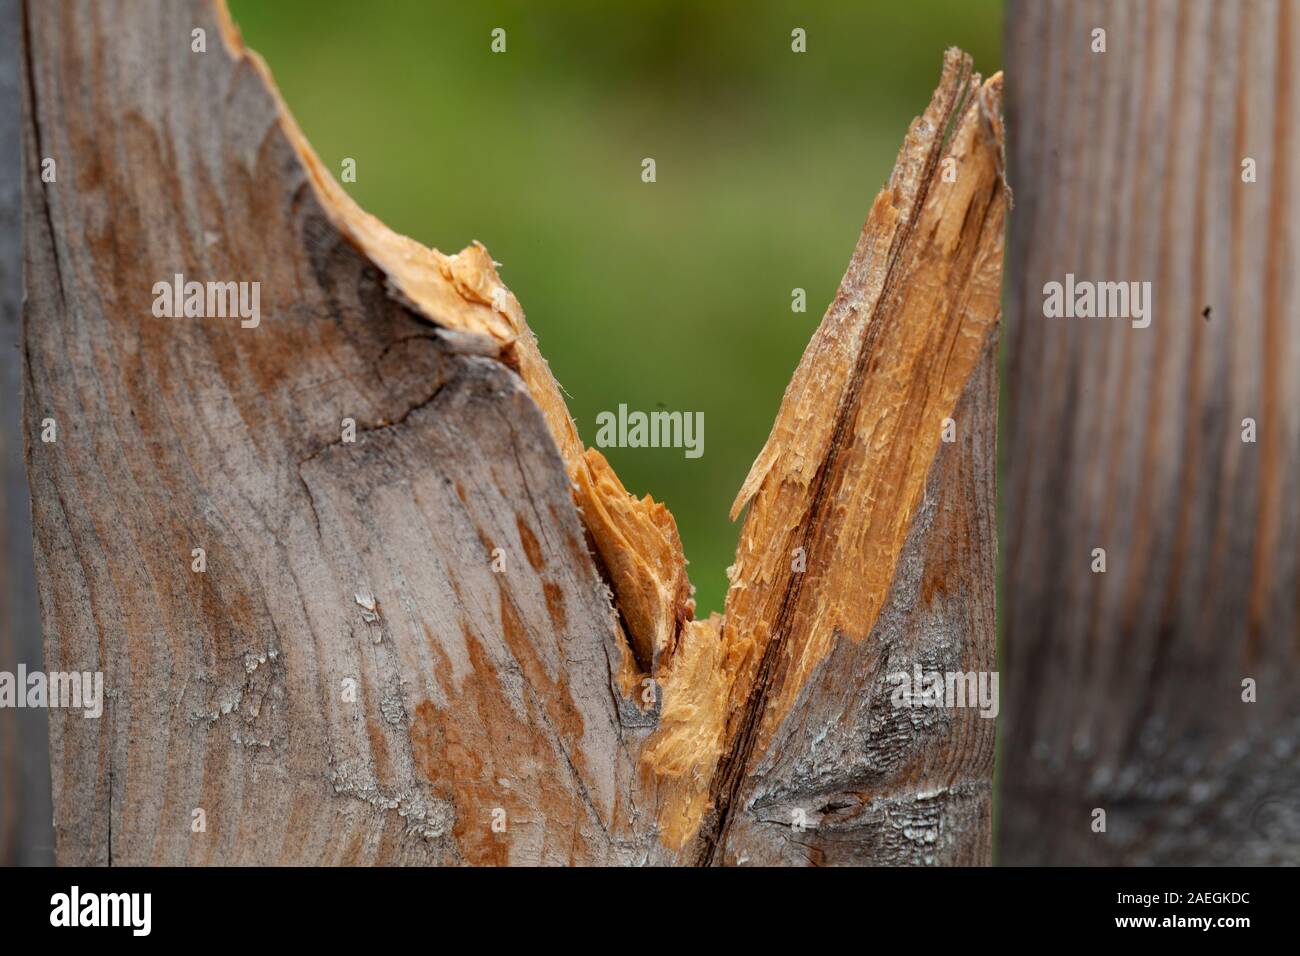 A broken wooden fence slat with green grass behind it. Stock Photo